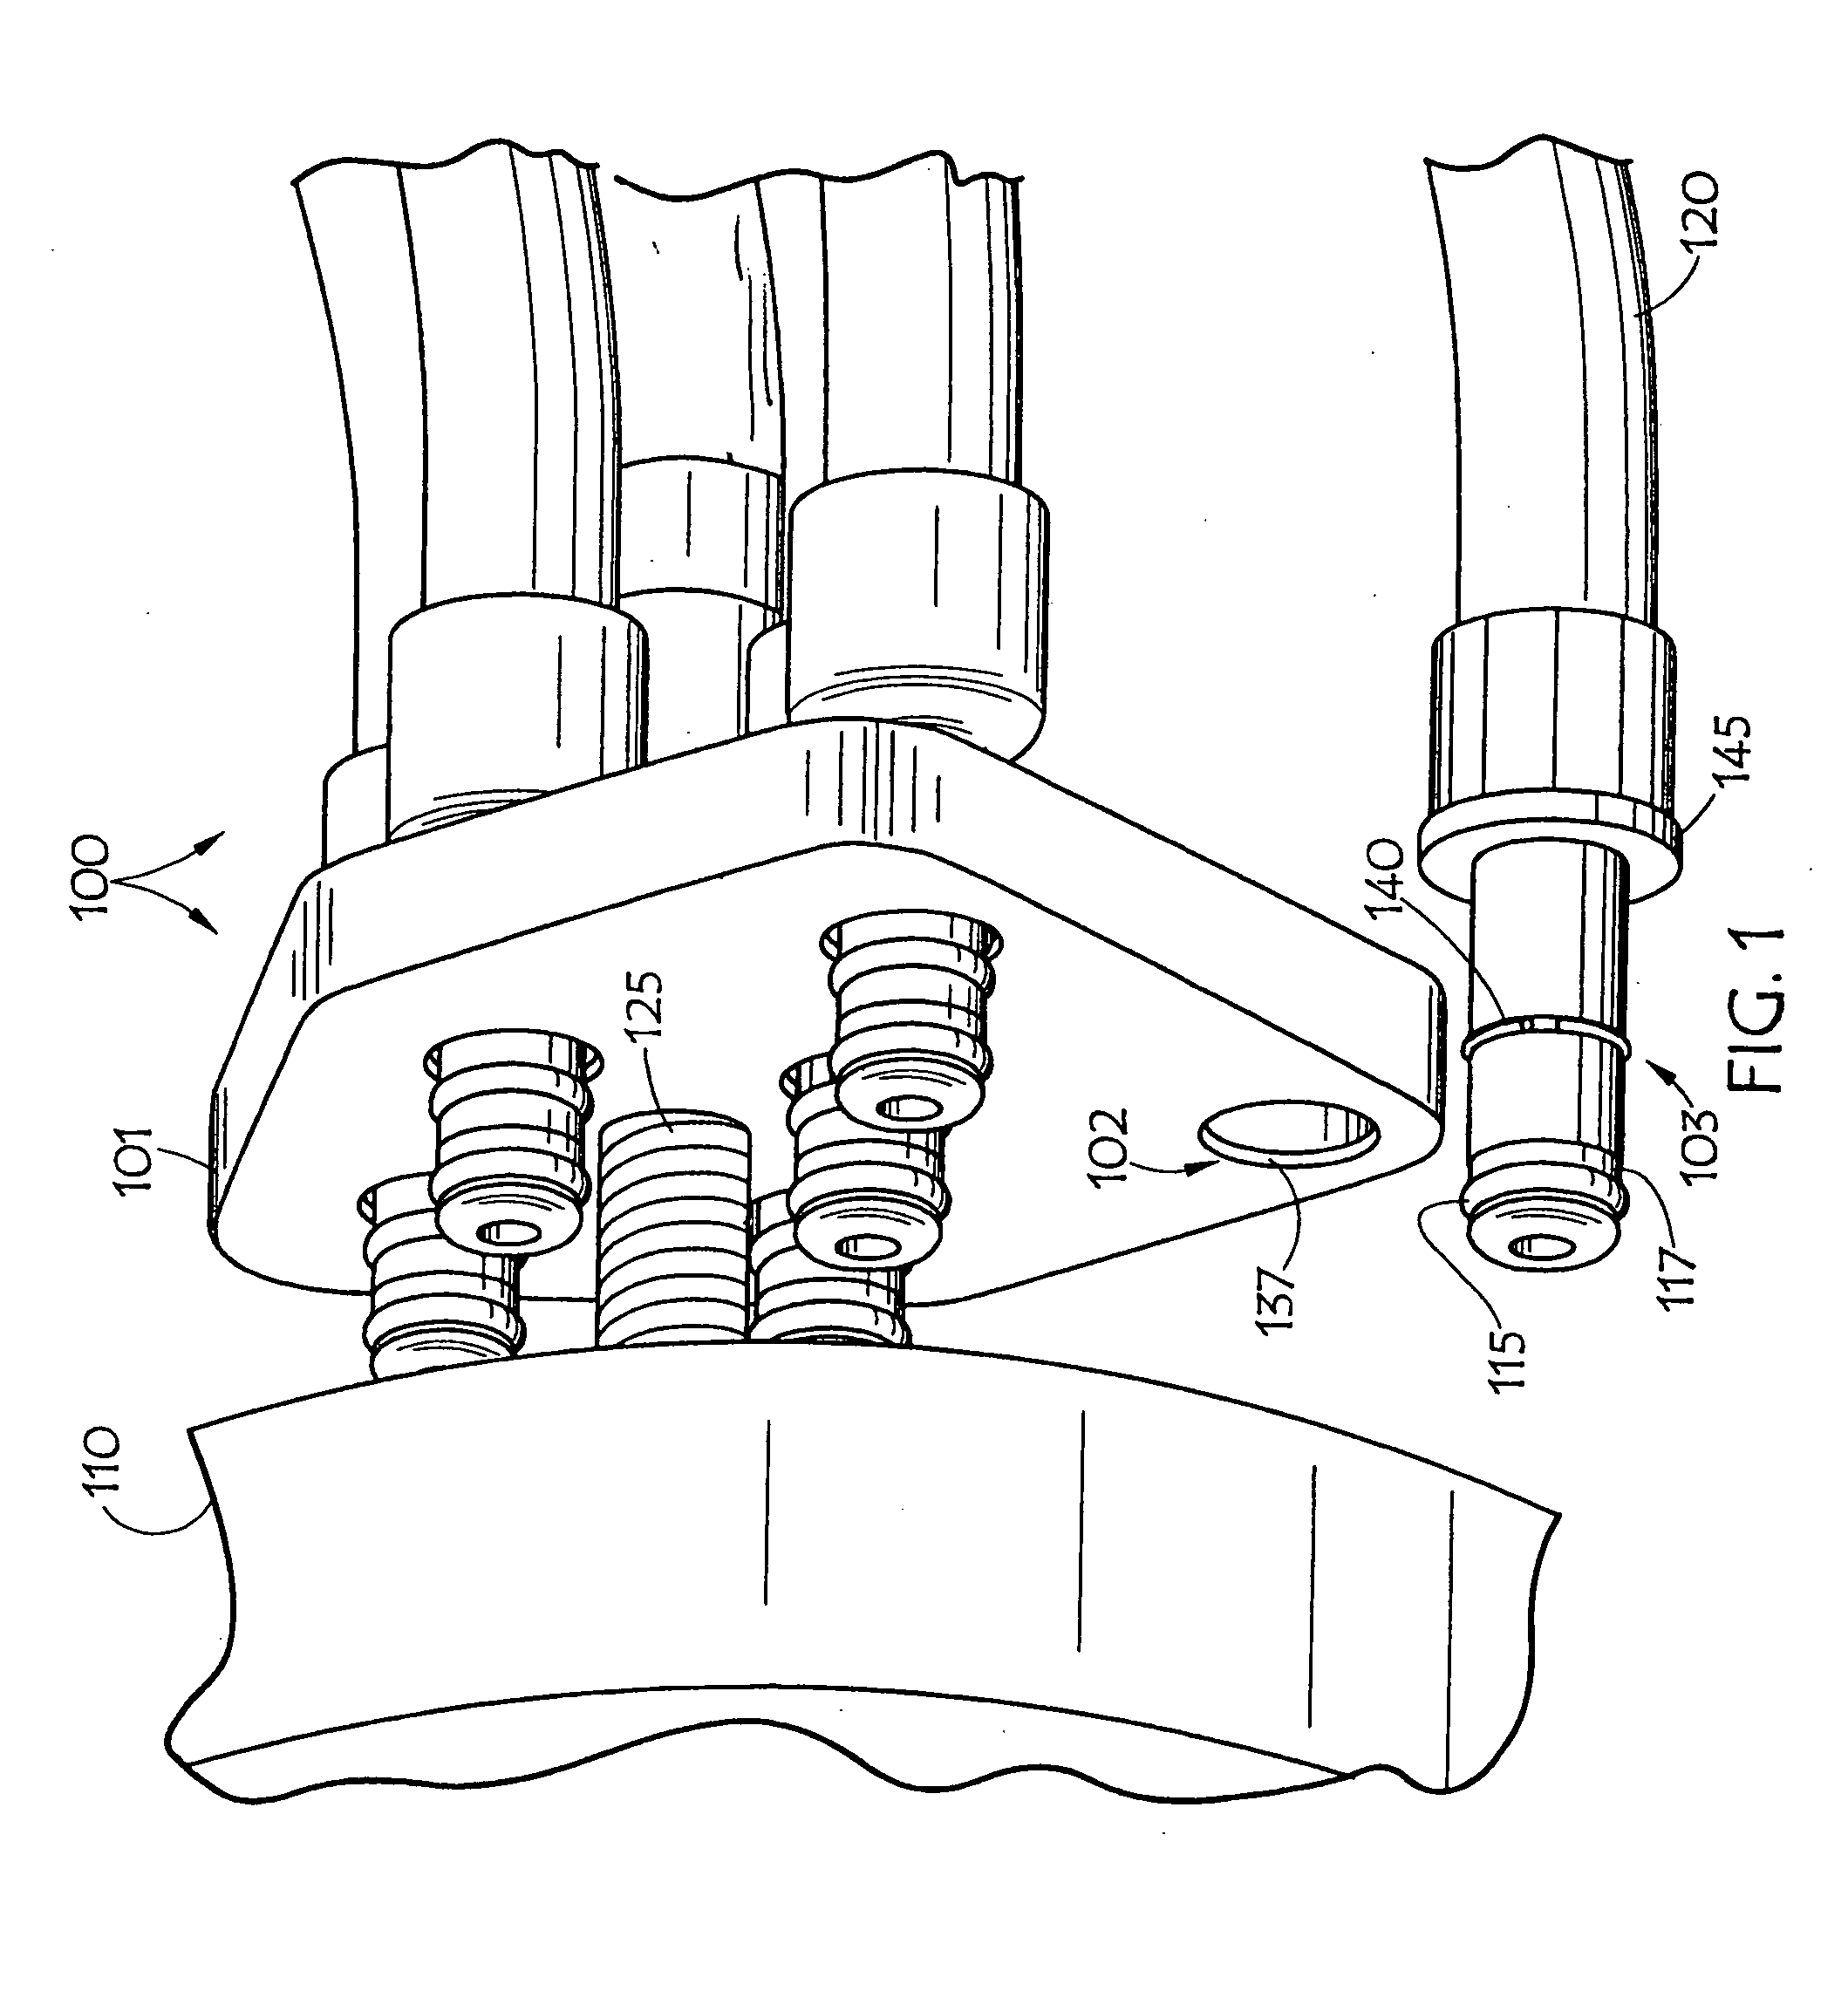 Multi-port fluid connectors, systems and methods